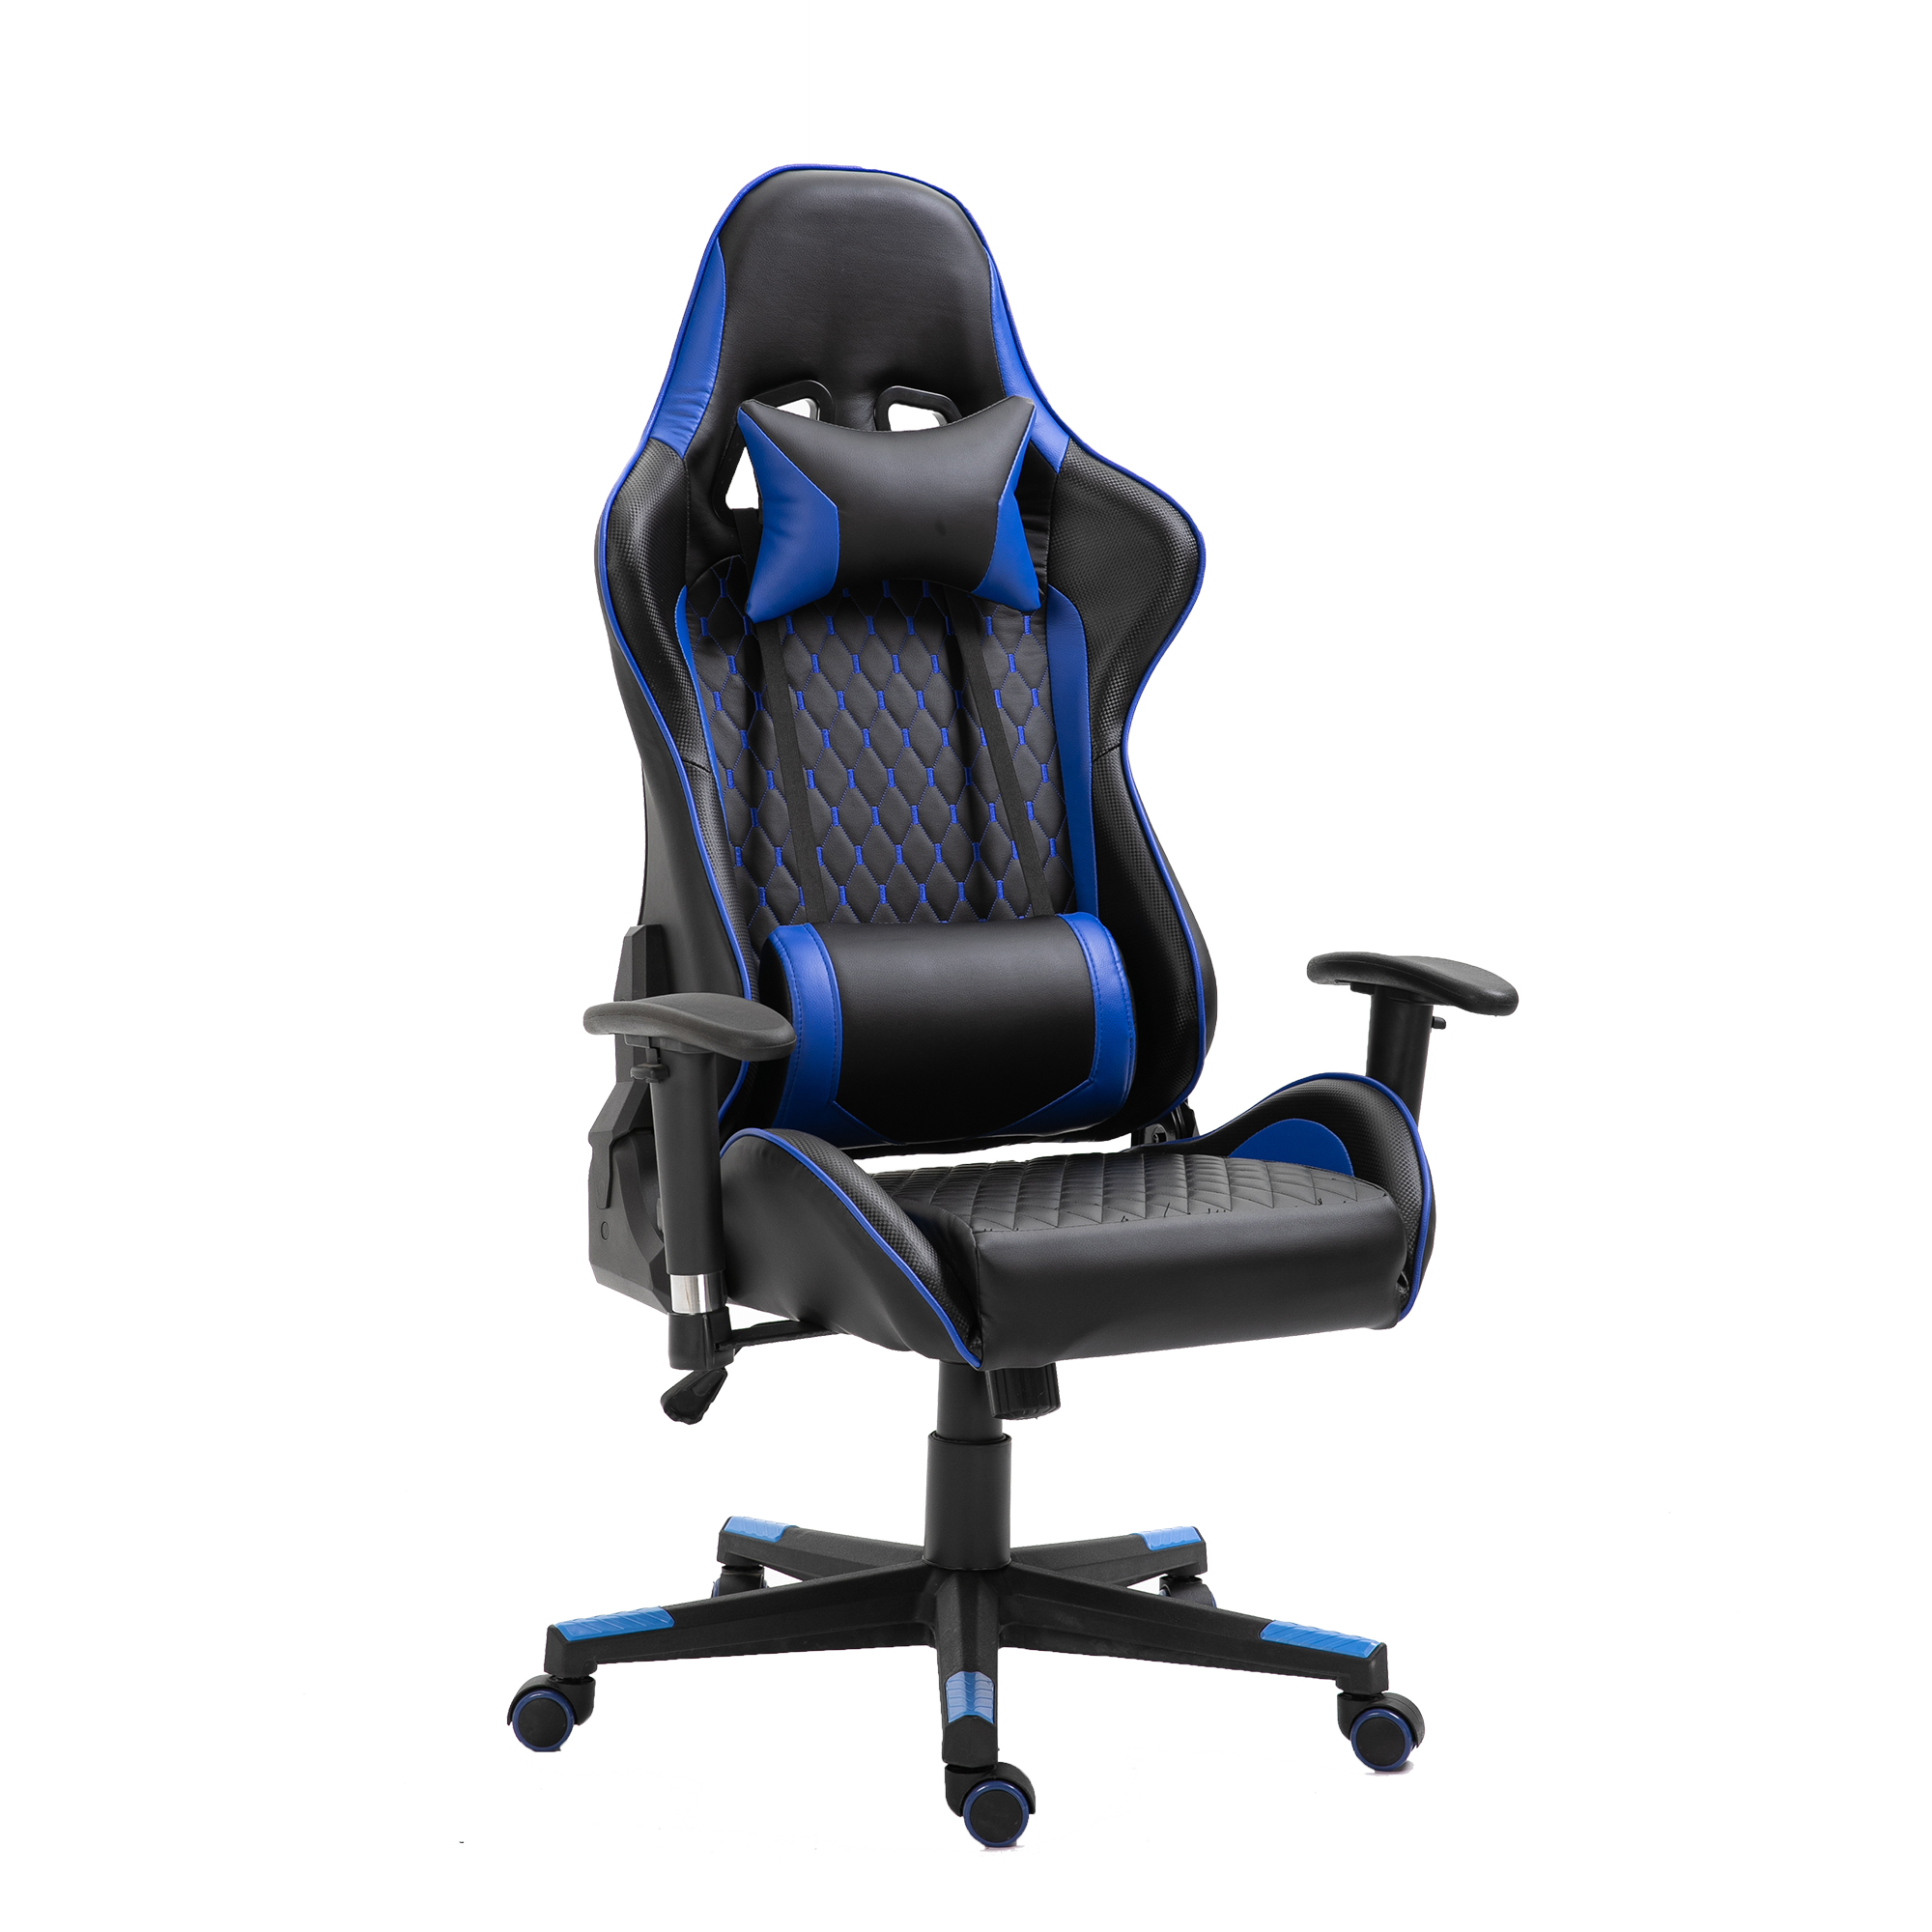 https://www.gamingchairsoem.com/pvc-leather-reclinable-sillas-de-oficina-ergonomic-luxurious-gaming-chair-product/